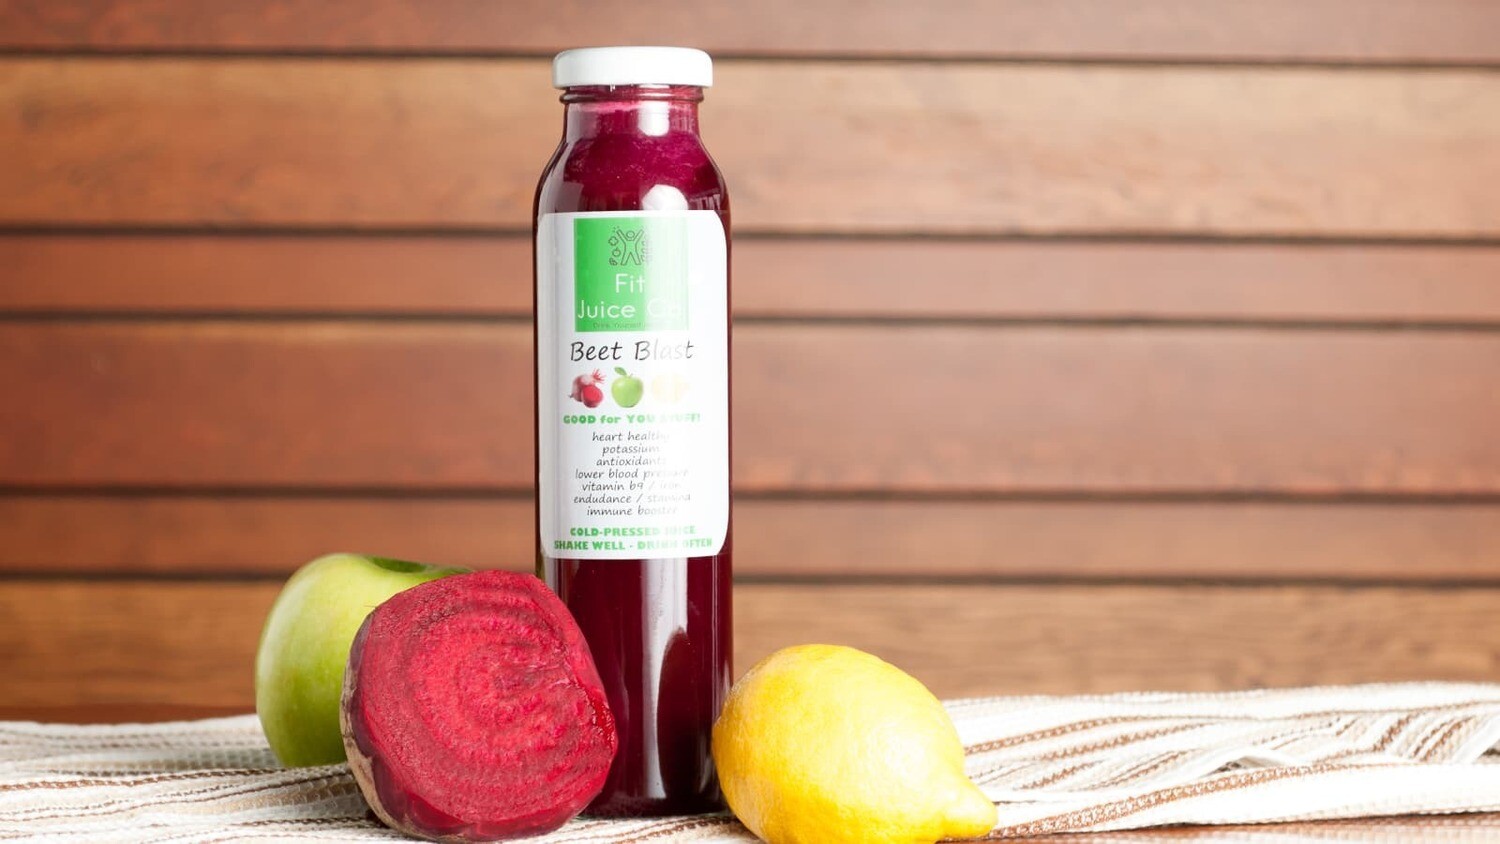 Heart Beet - LOCAL Fit Juice Co